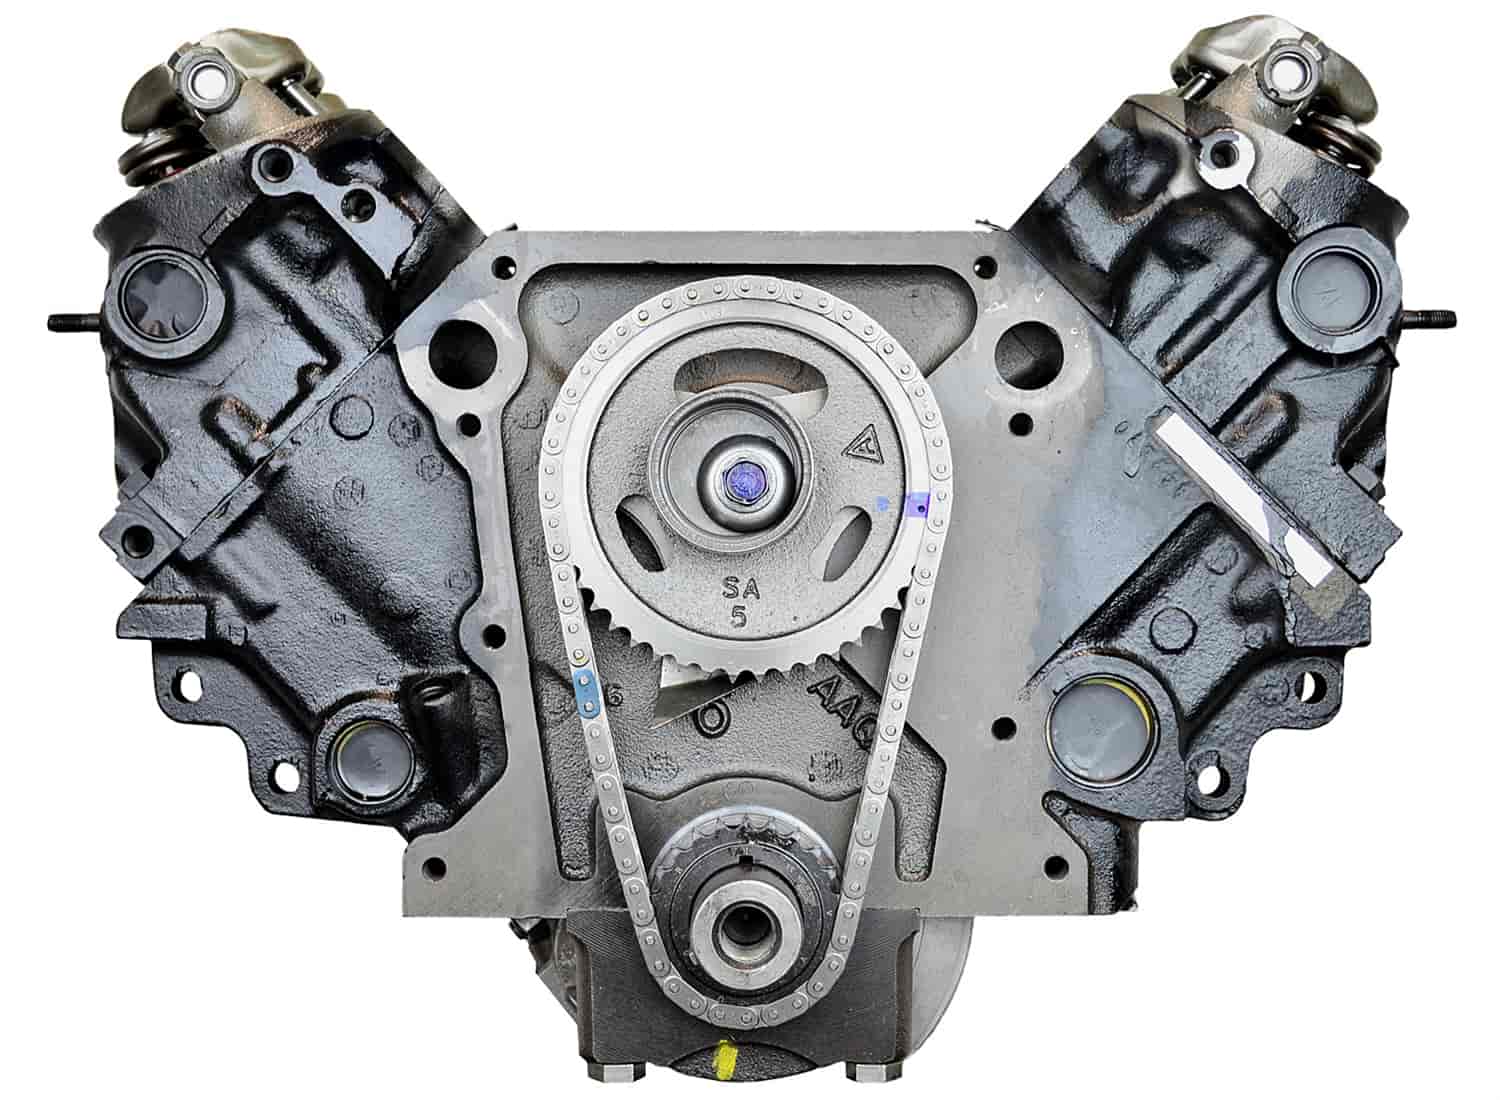 Remanufactured Crate Engine for Marine Applications with 1975-1988 Small Block Chrysler 330ci/5.9L